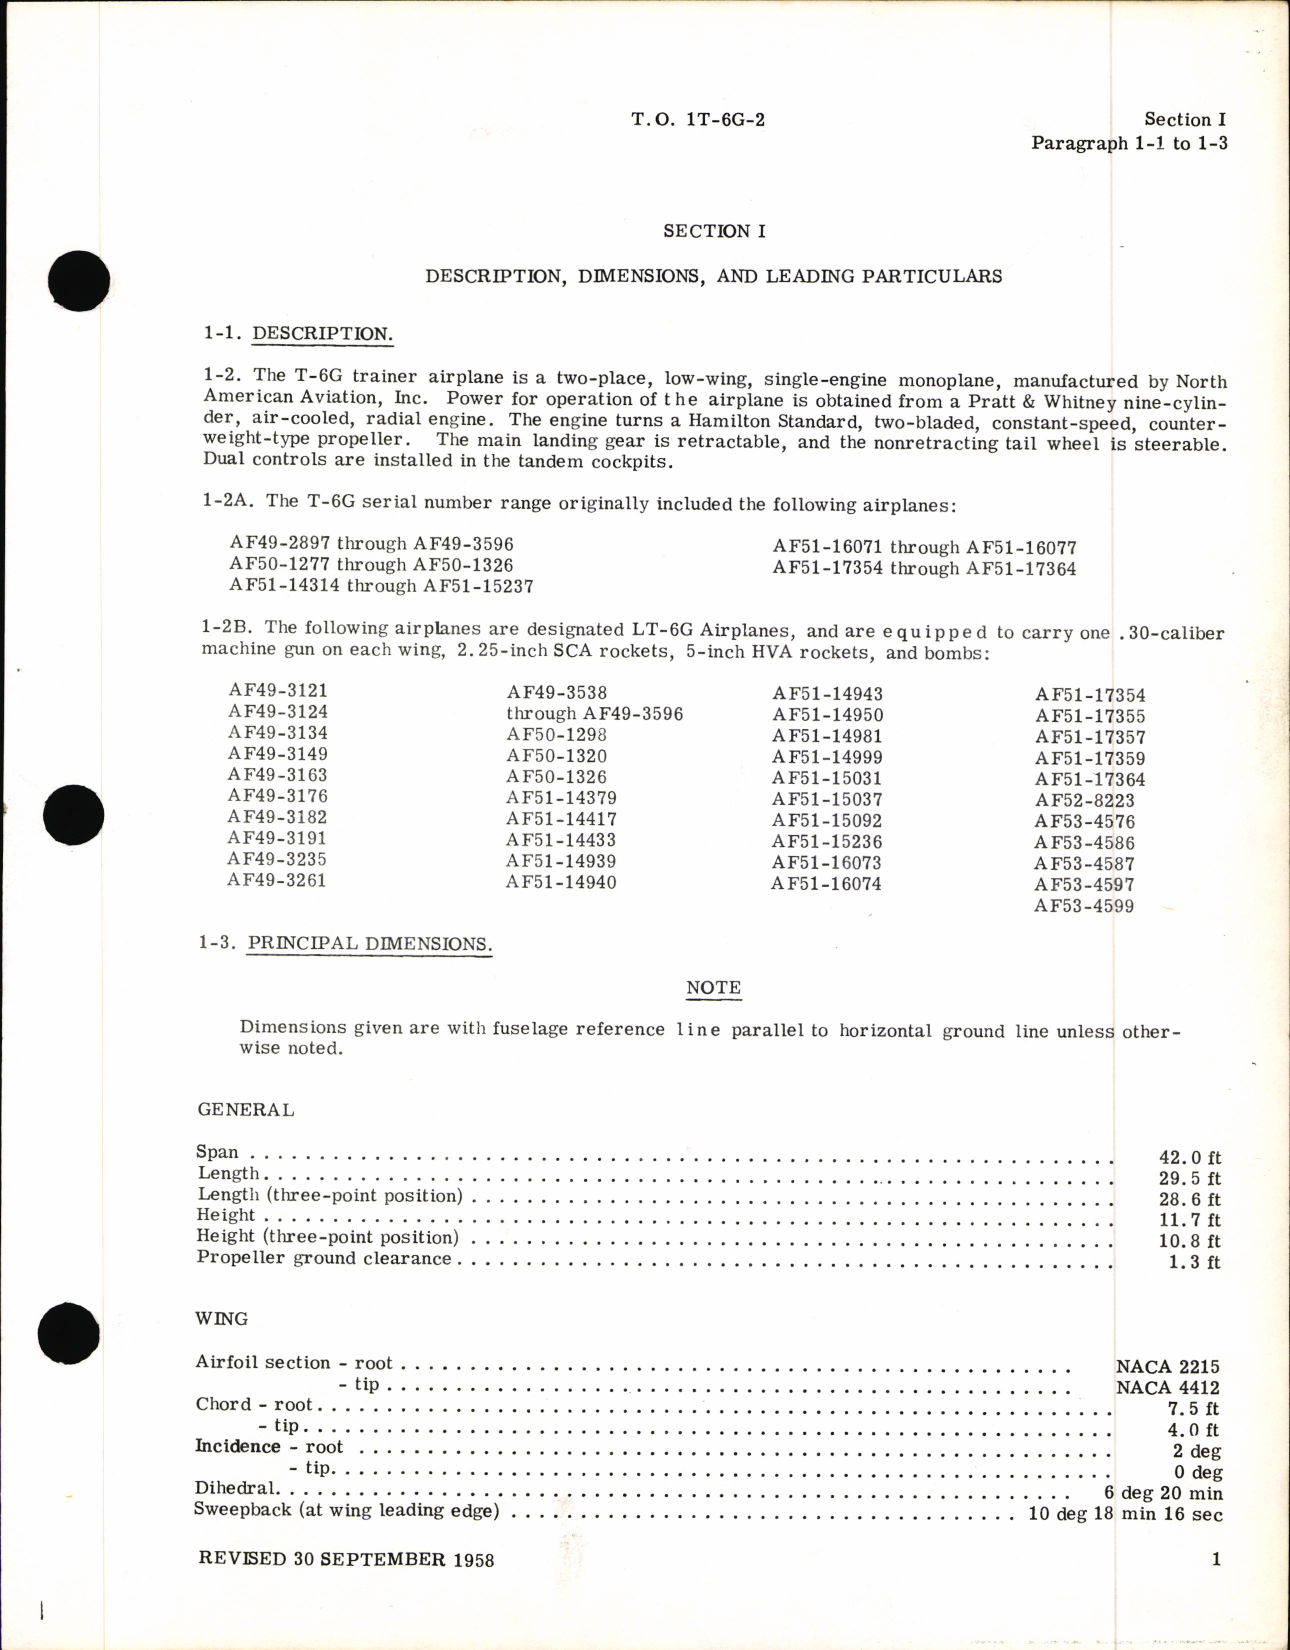 Sample page 5 from AirCorps Library document: Erection and Maintenance Instructions for T-6G